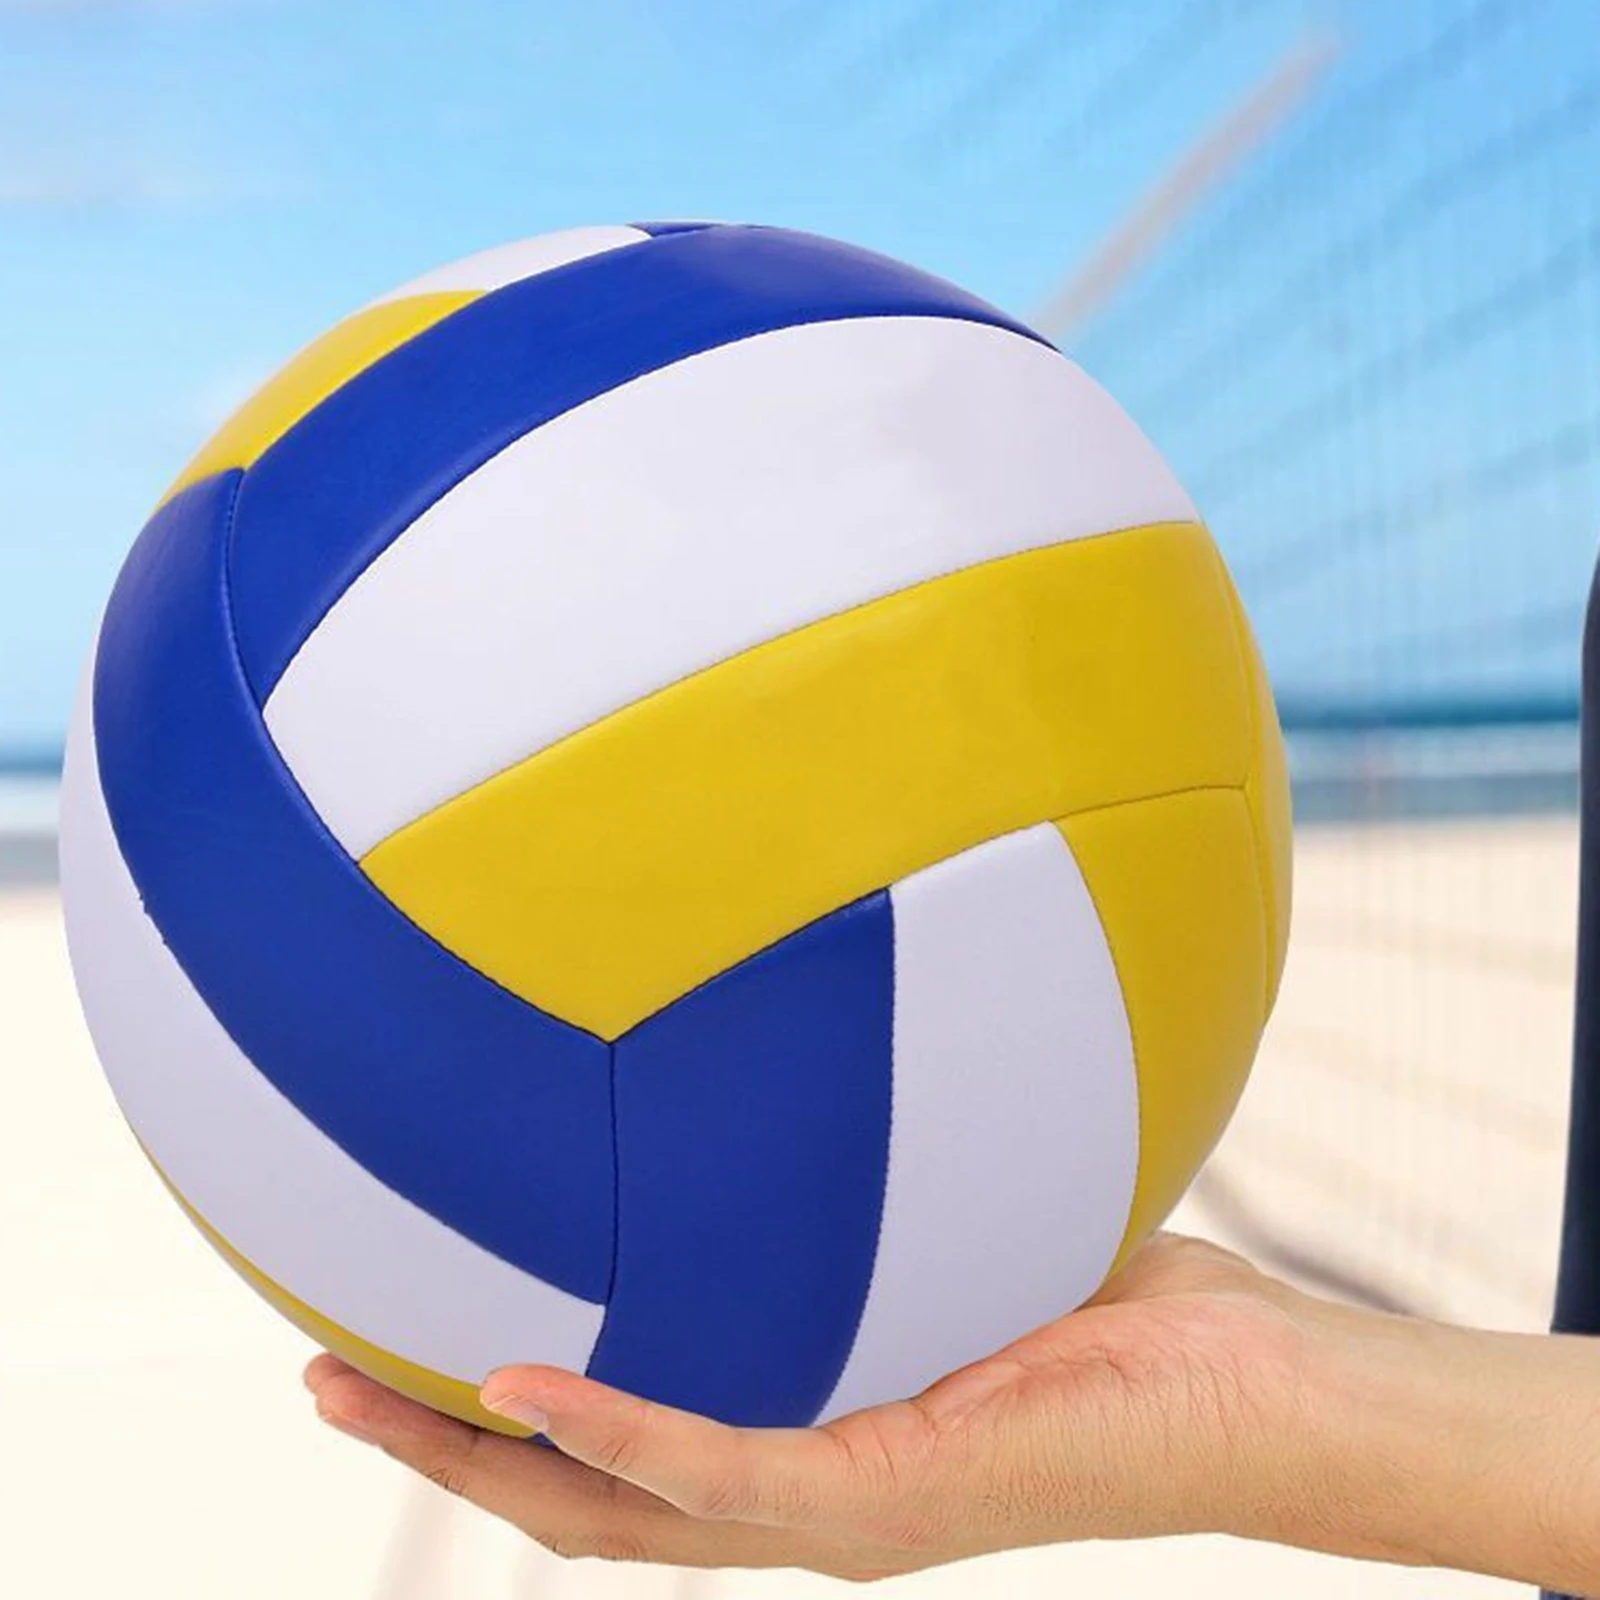 

No.5 Volleyball Volleyball Airtight Competition Professional Size 5 Soft Team Sports 20.5cm For Beach Hot Sale